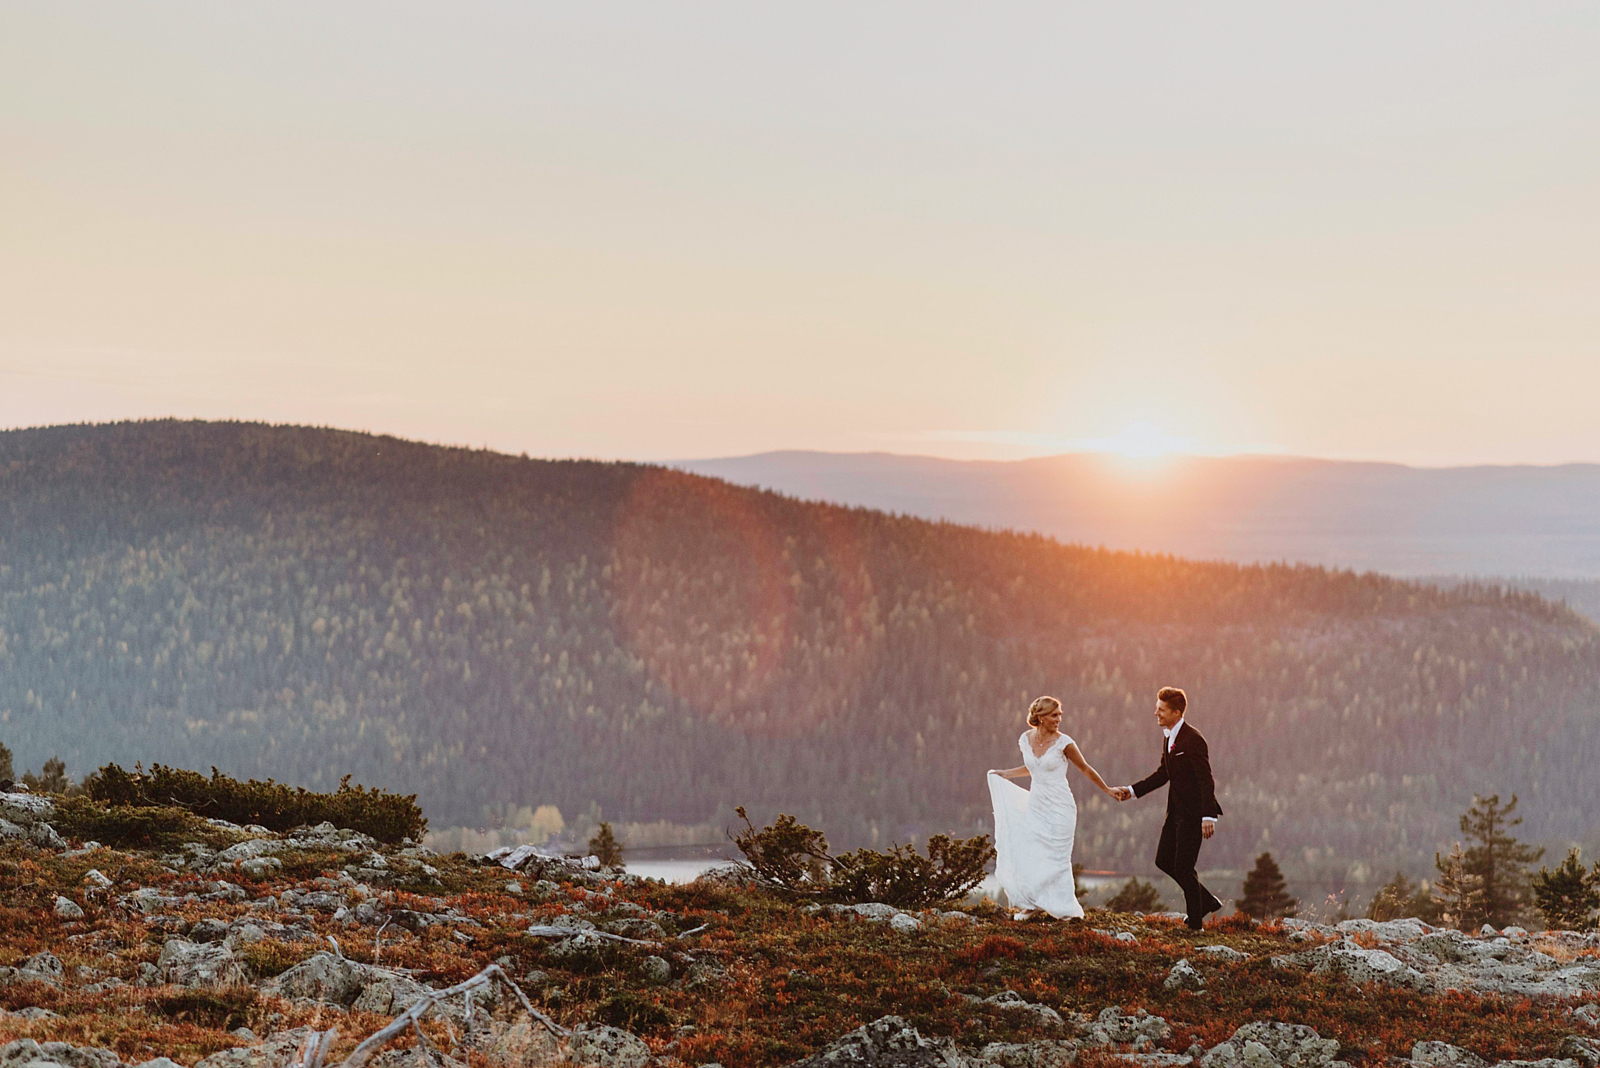 30 Dreamy Wedding Photos In Epic Landscapes